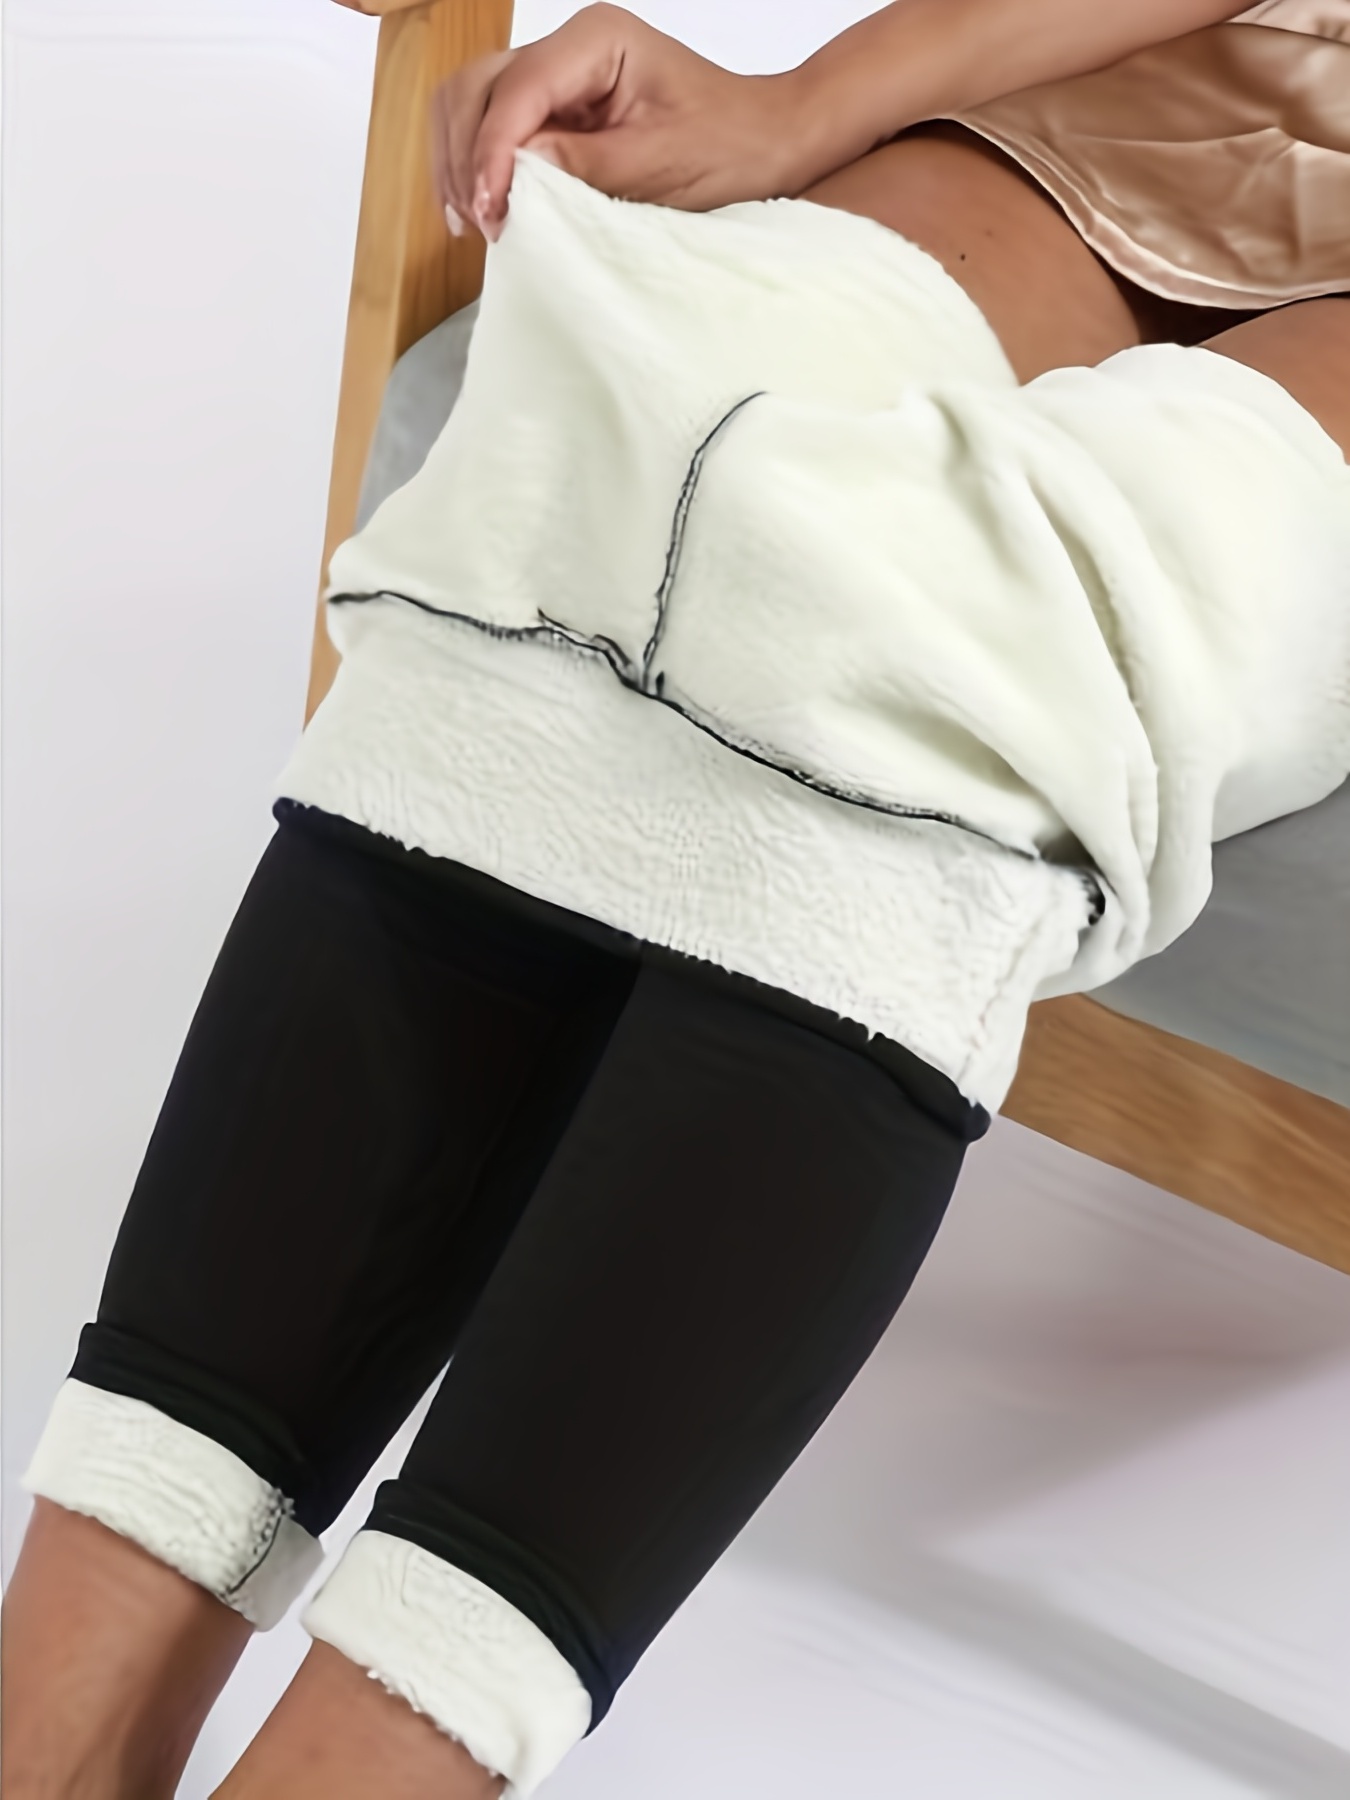 Winter Fleece Lined Leggings Women High Waist Velvet Warm Pants Solid  Comfortable Stretchy Thermal Tights Casual Leggings - AliExpress